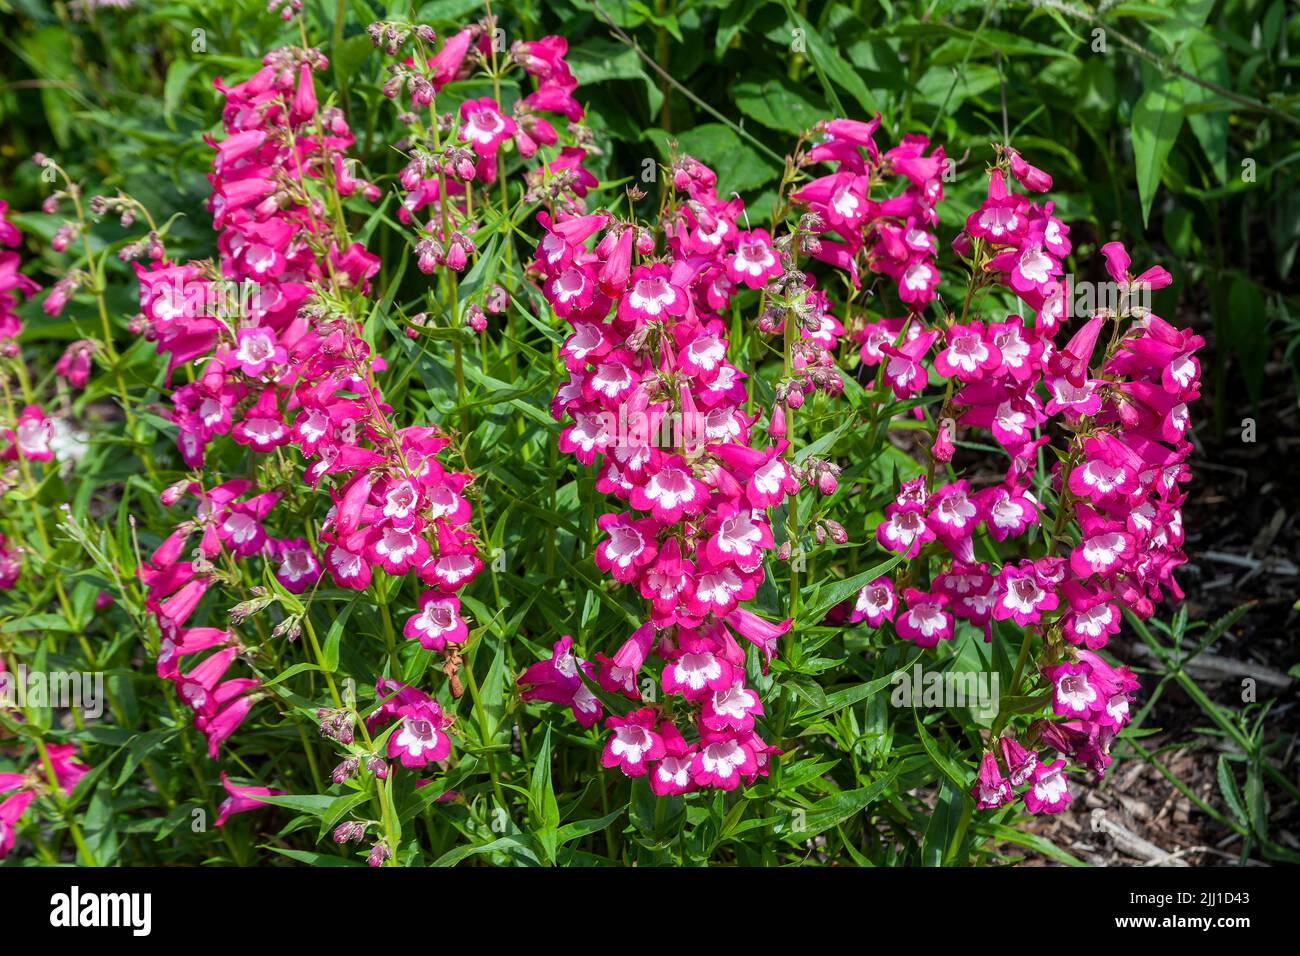 Penstemon 'Pensham Marilyn' a summer autumn fall flowering plant with a pink white summertime flower, stock photo image Stock Photo